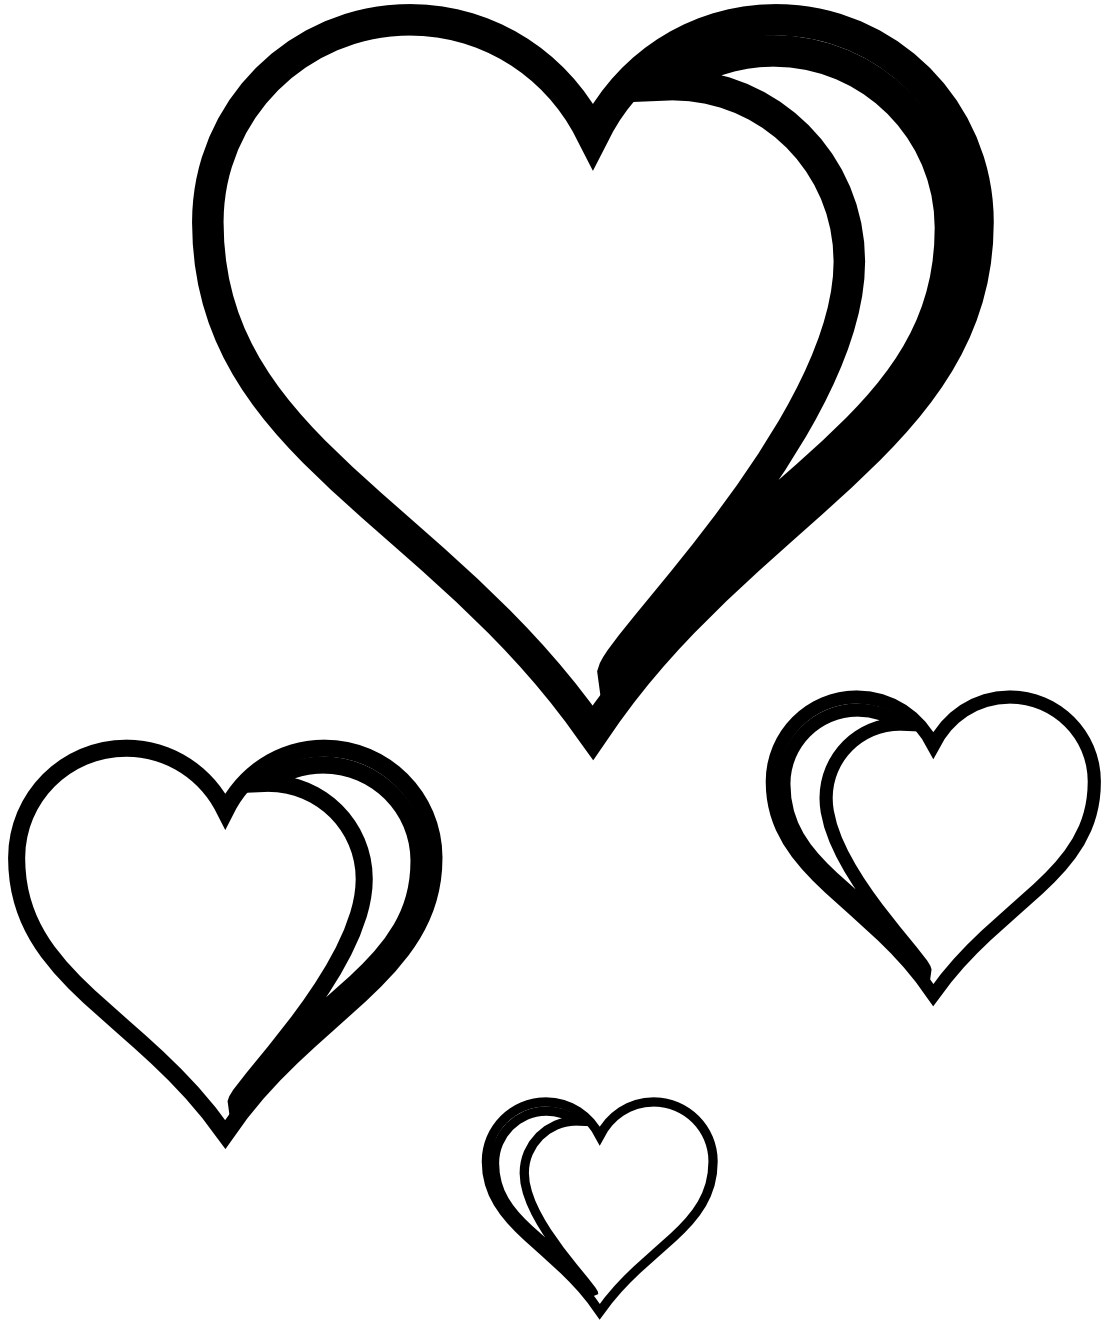 Heart Clipart Black And White - free clipart download - tree heart clipart, sisters not by blood free clip art but by heart poems, sacred heart of jesus clipart, rustic heart clipart, rustic country heart clip art, red heart clipart, images of hearts clipart, human heart clip art, heart paw print clip art, heart images clip art, hand with heart clipart, green heart clipart, free heart images clip art, free heart border clip art, free clip art hearts and flowers, cross with heart clipart, clipart purple heart, cartoon heart clipart, black and white heart scroll underline clip art, black and white clip art hearts